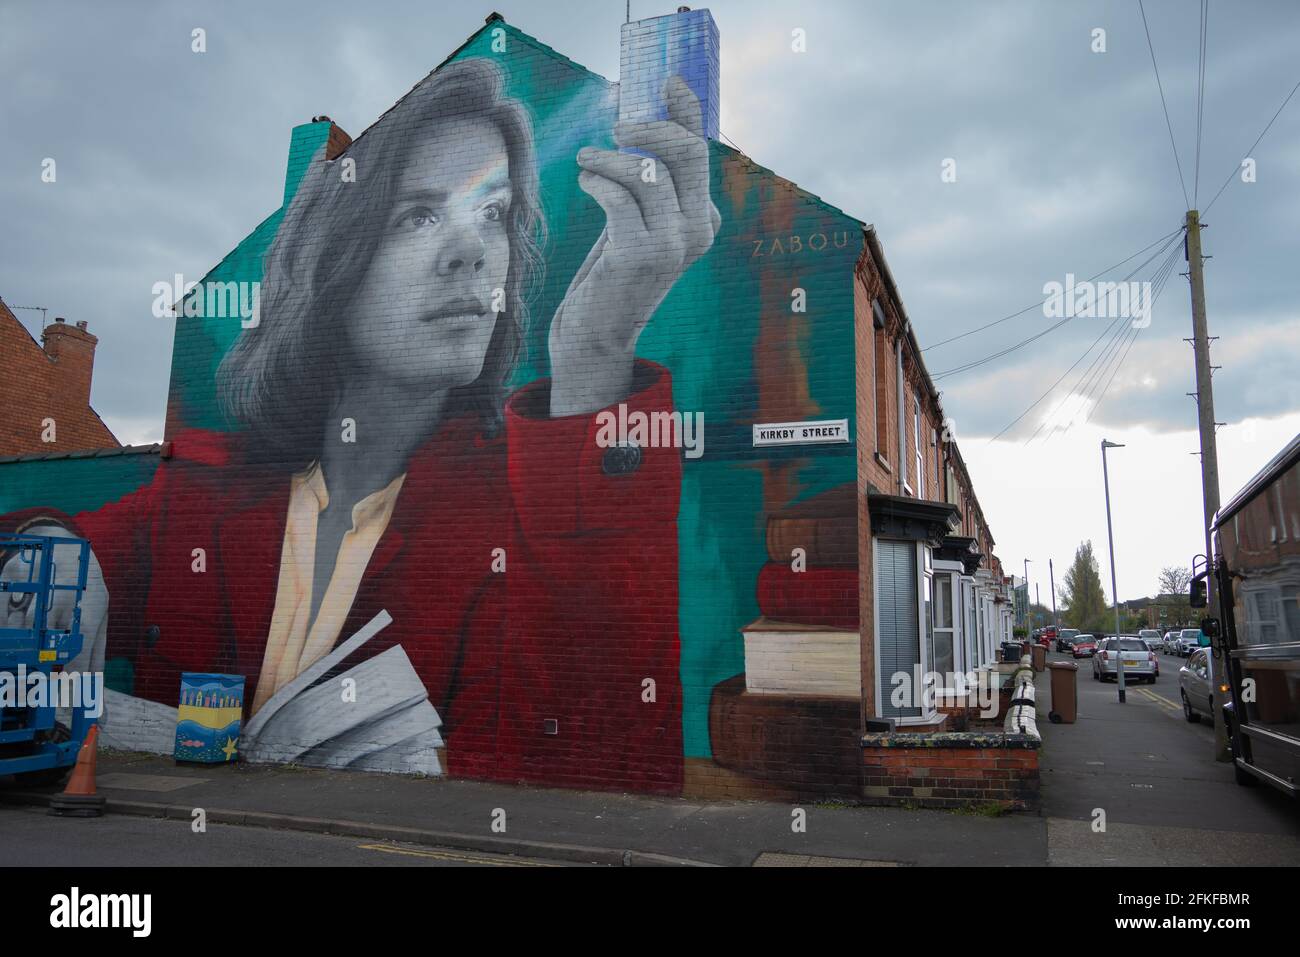 La Sincil Banksy, Lincoln art project, Zabou, French artist, Sir Isaac Newton, prism, spray painted, Sincil Bank Art Project, community art project. Stock Photo